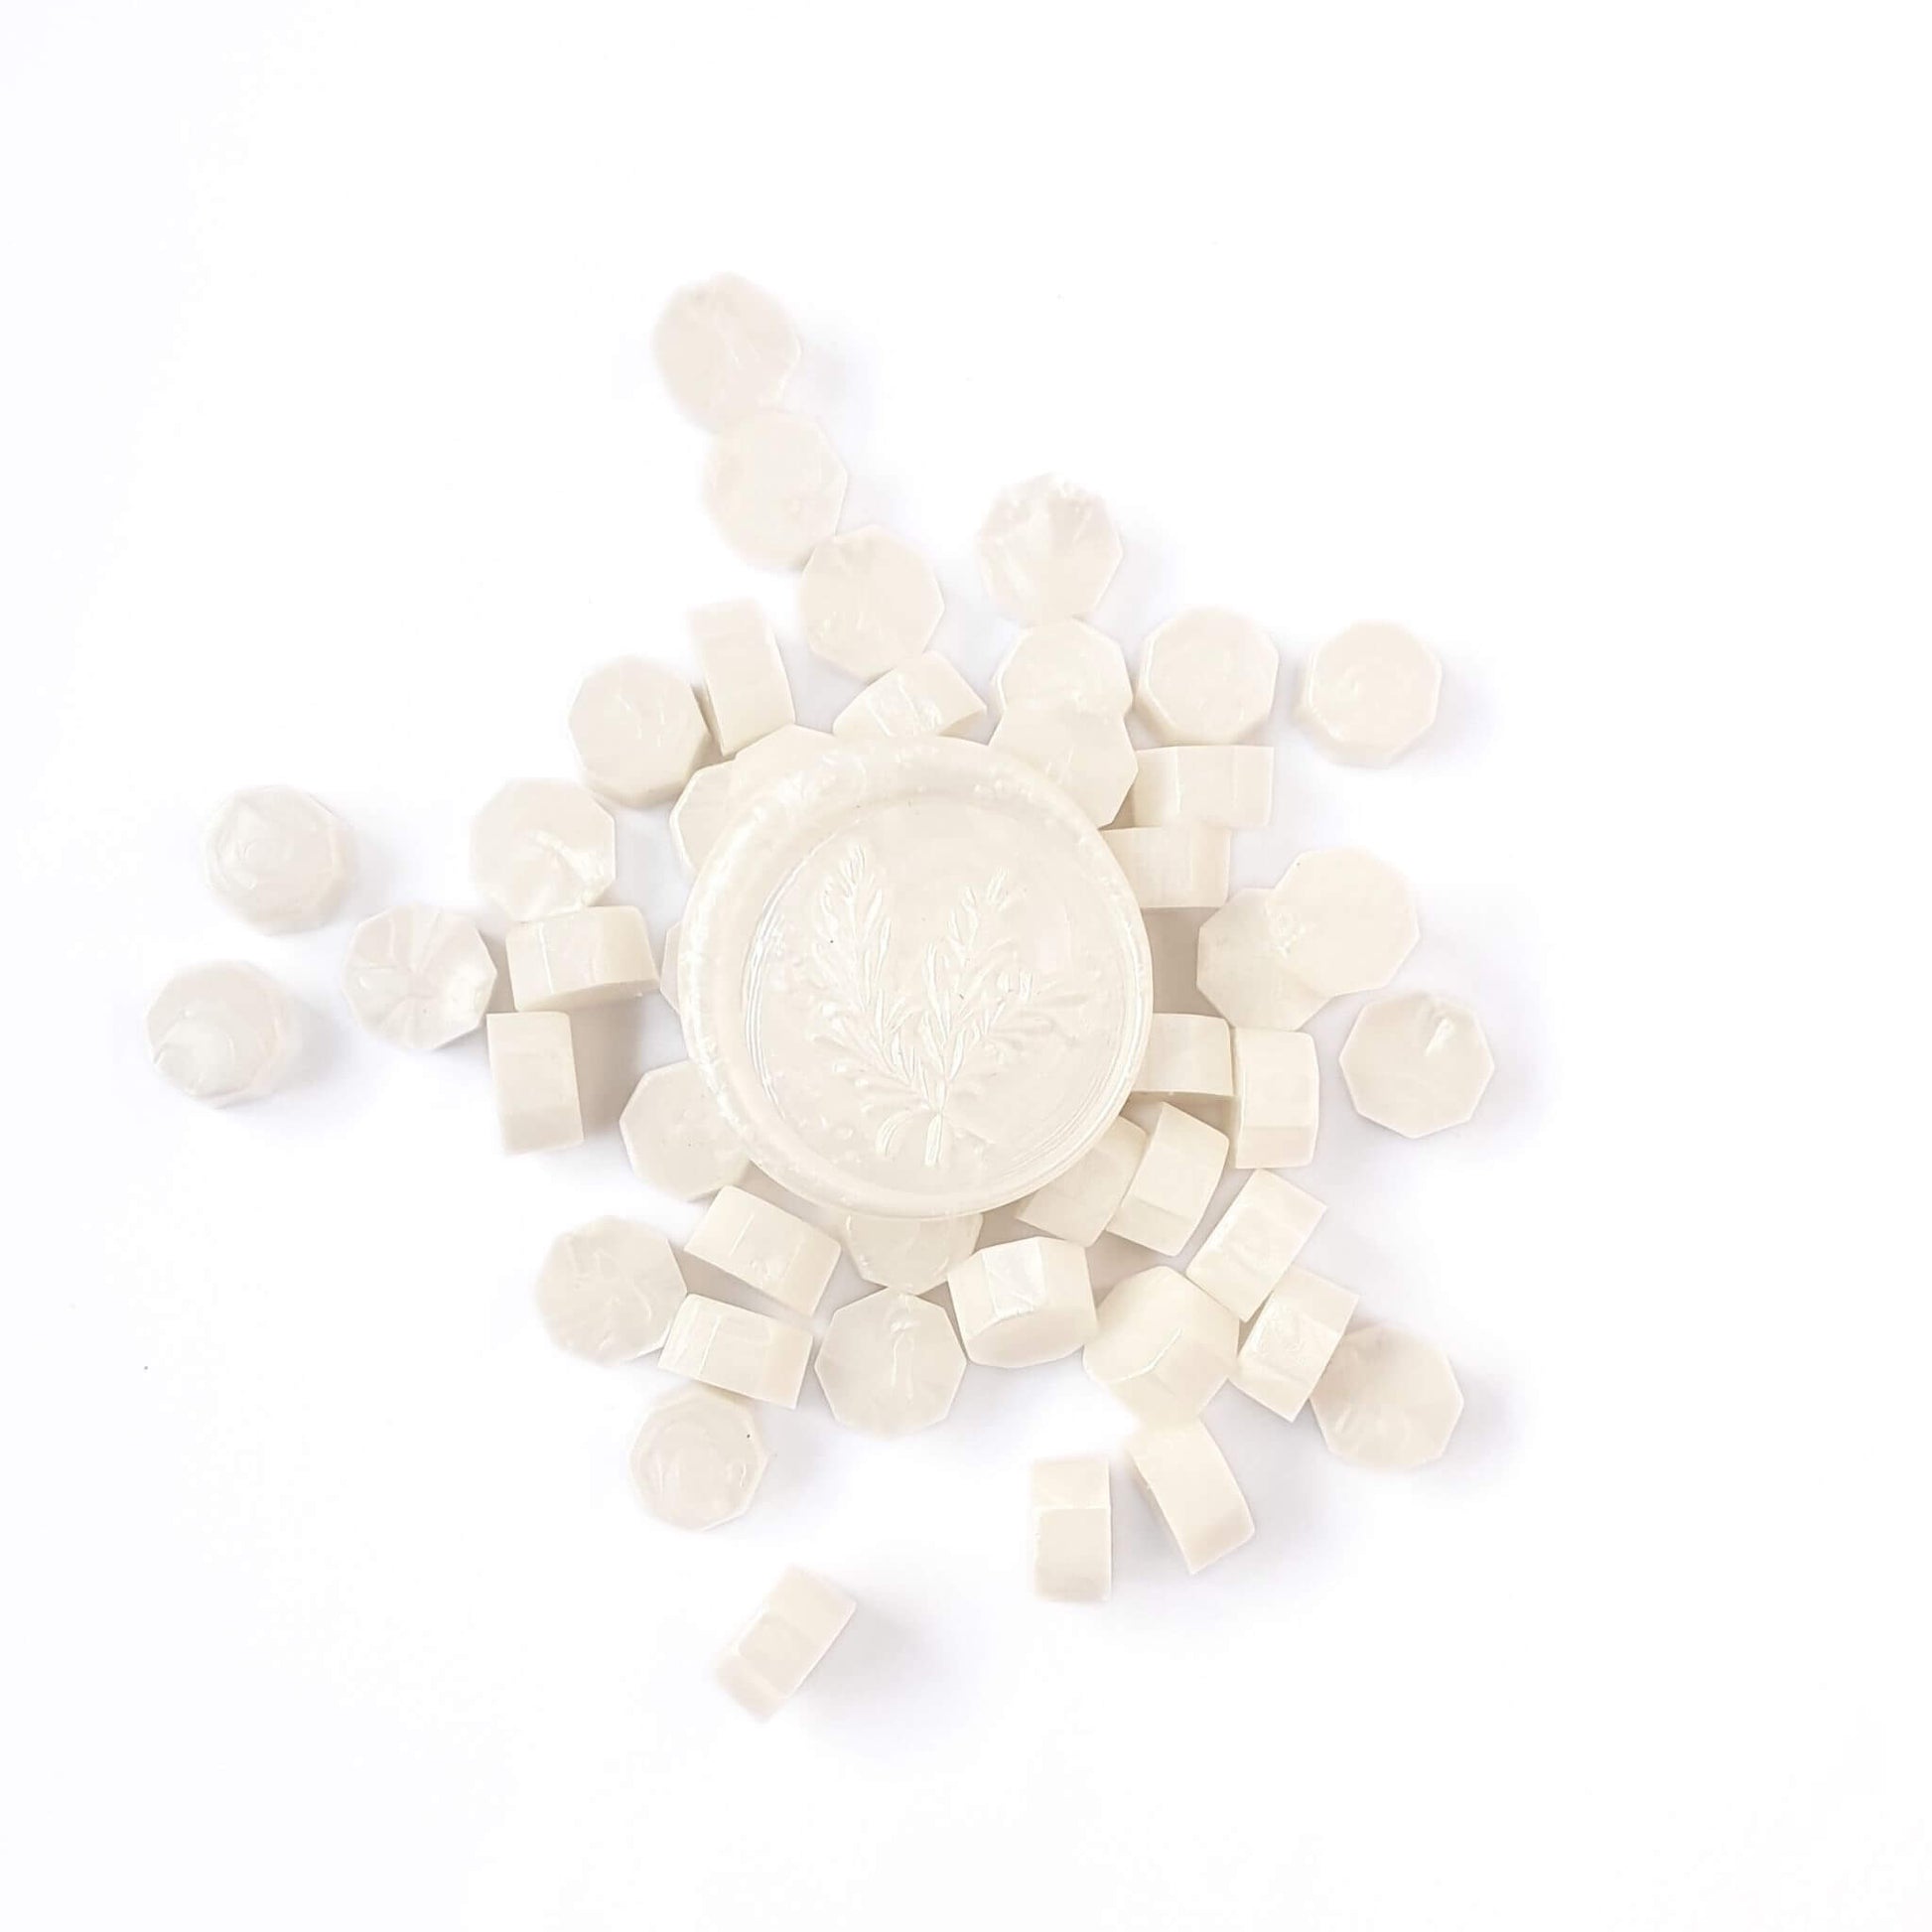 White pearl sealing wax beads in a pile woith a white pearl wax seal in the centre. 